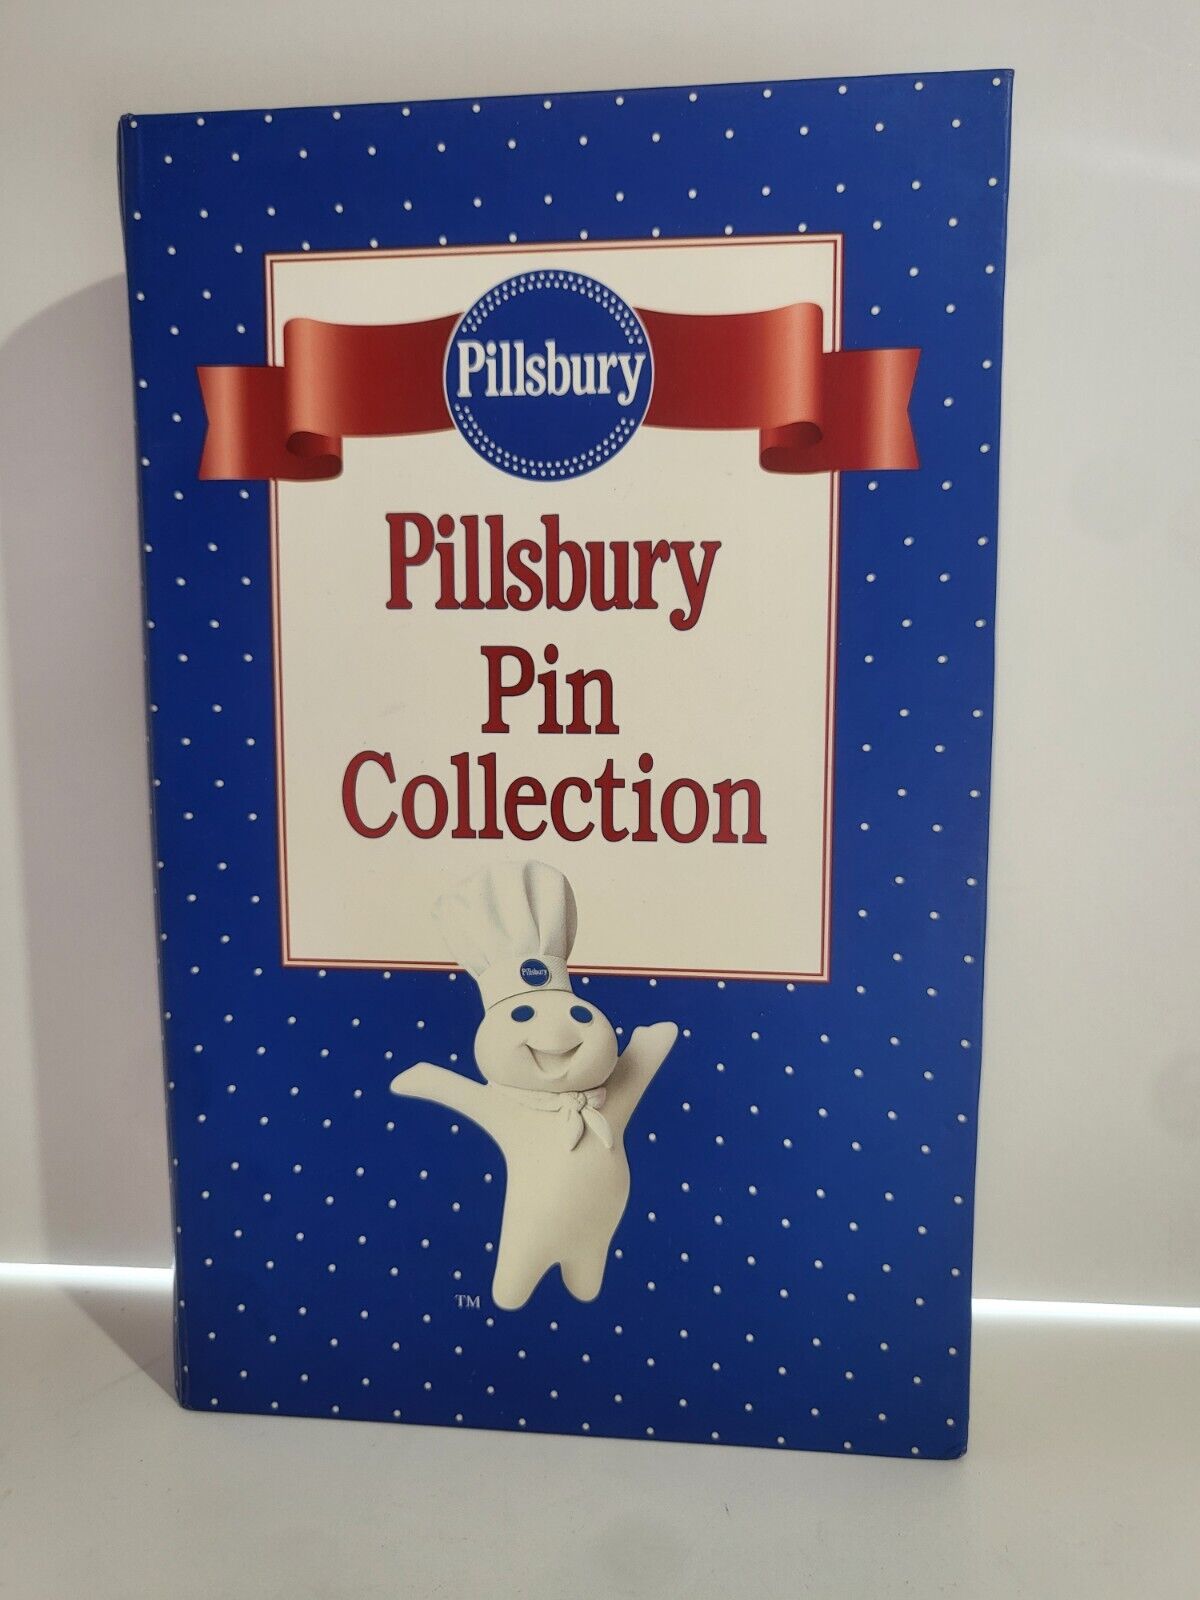 PILLSBURY DOUGHBOY 8 PIN COLLECTION by Danbury Mint DISPLAYED IN BOOK BOX